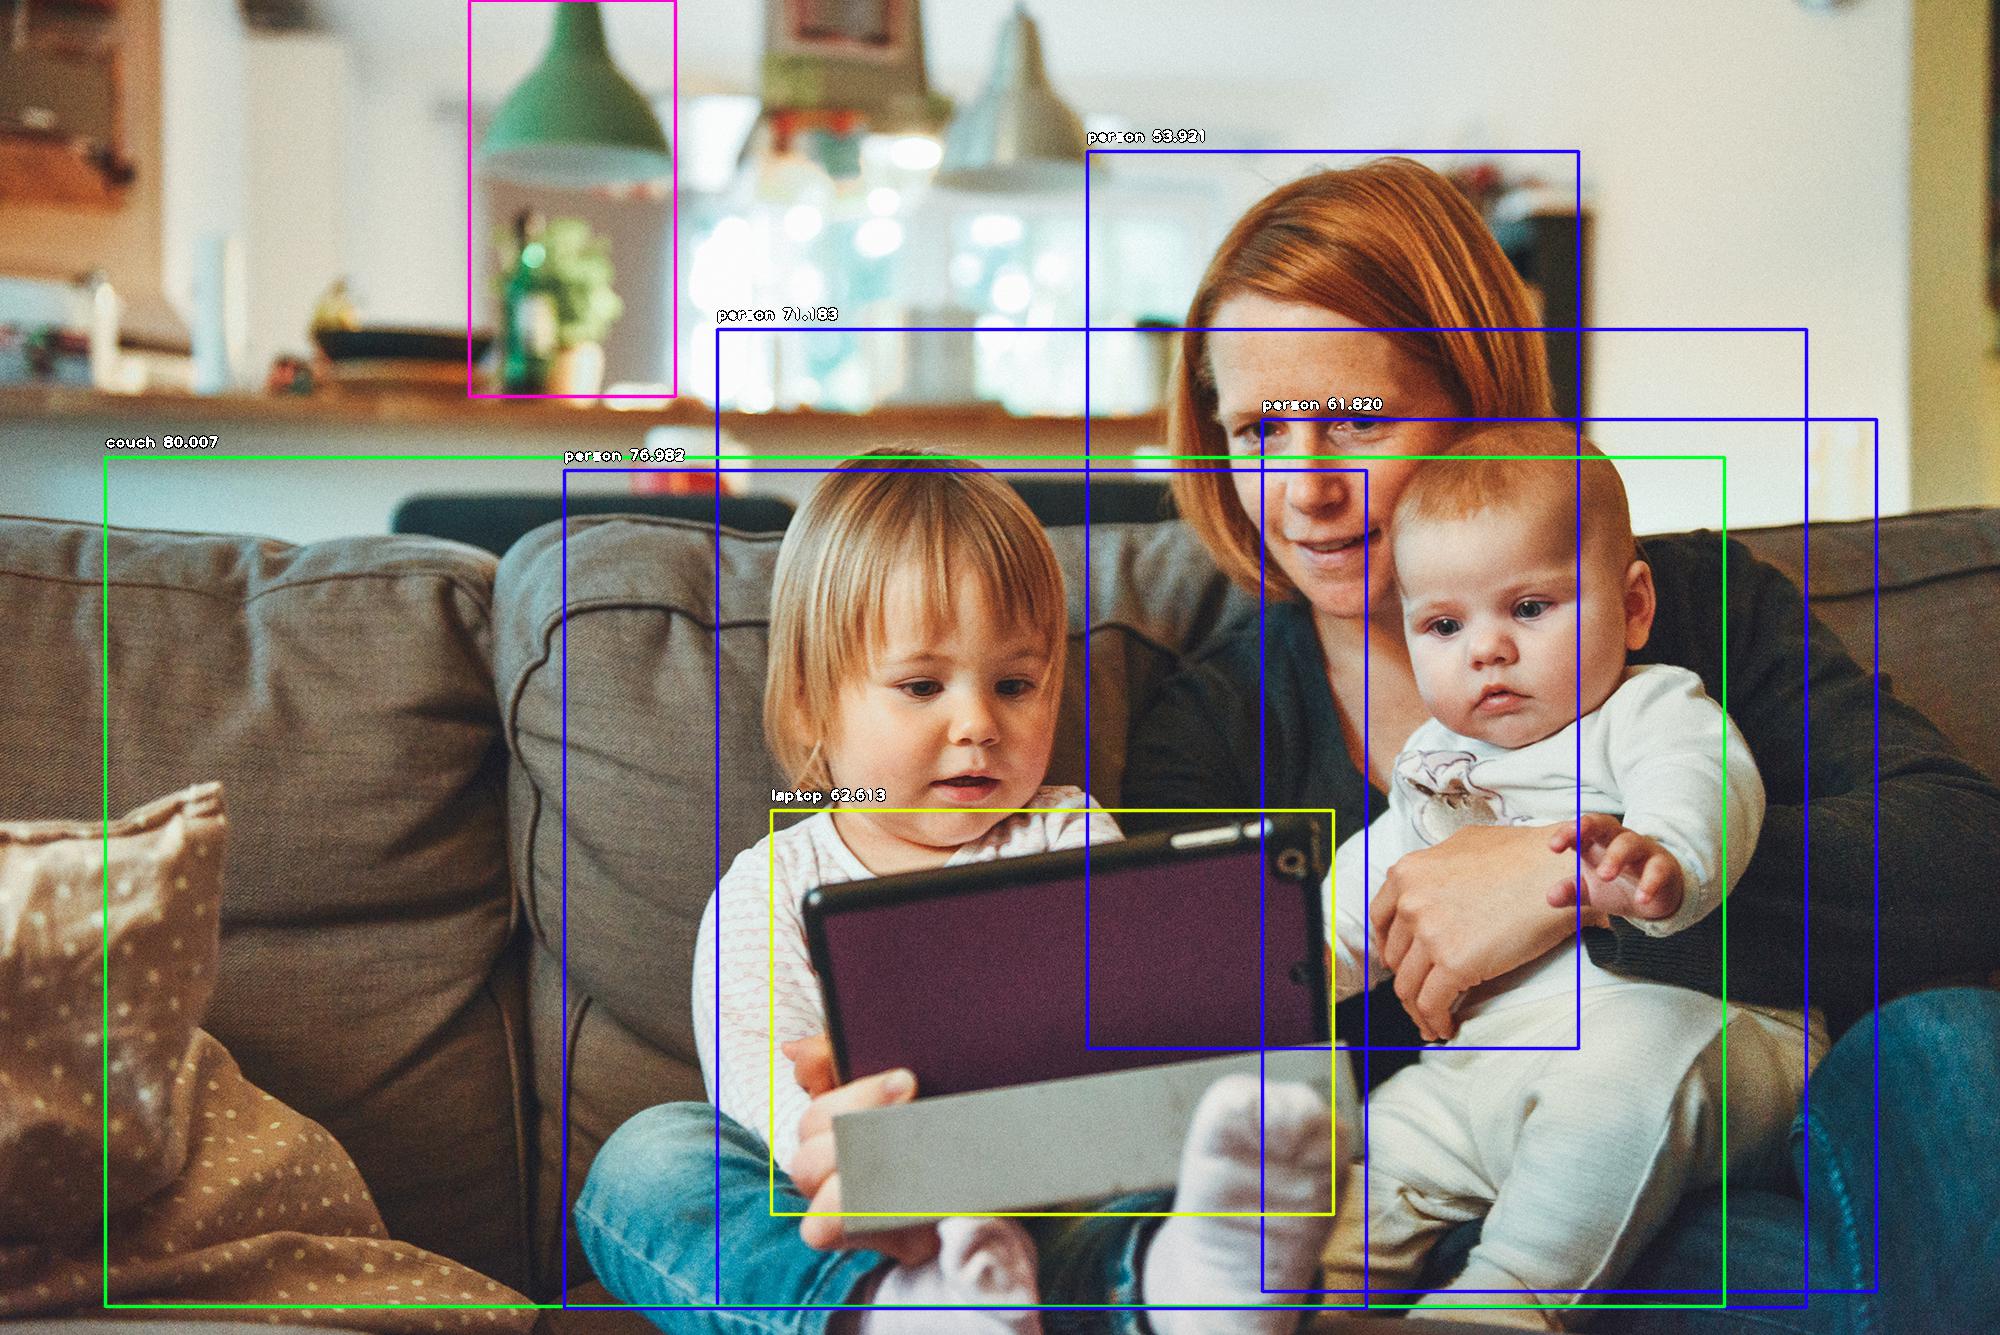 Family object detection